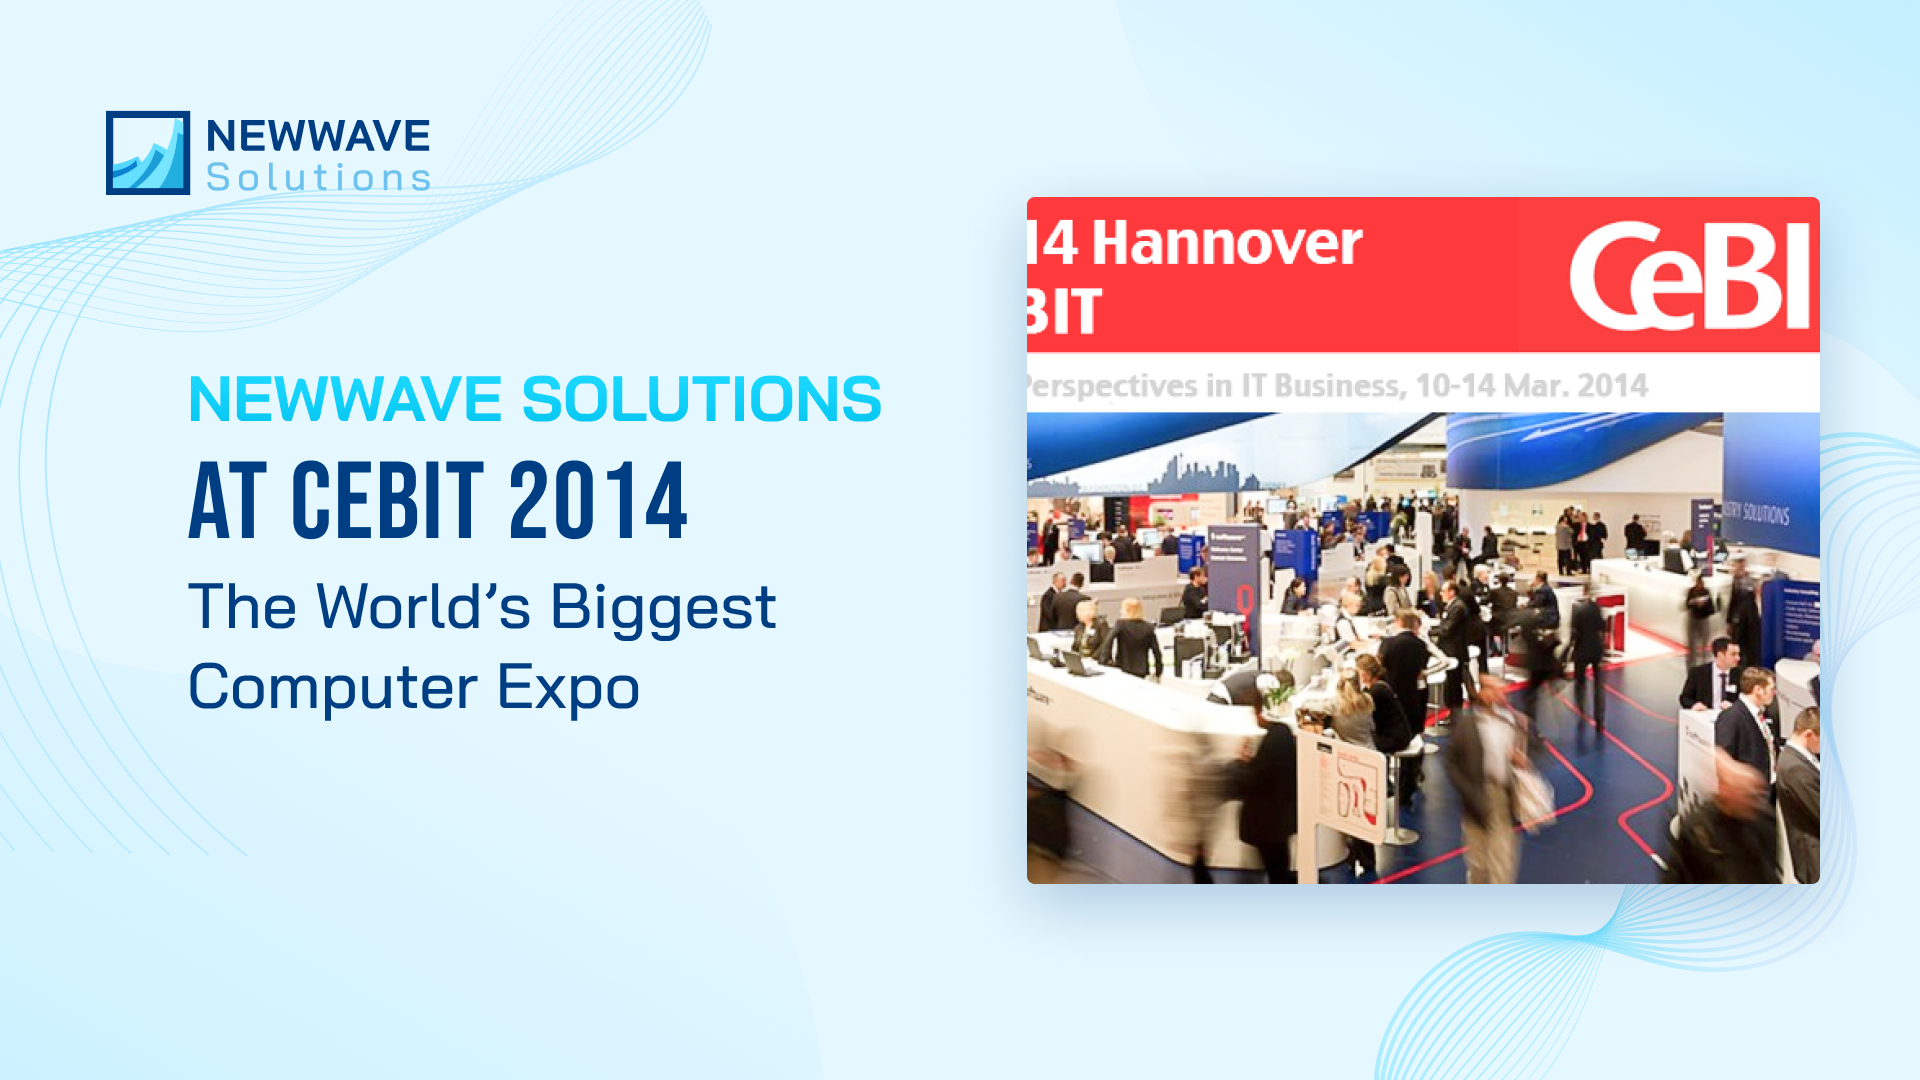 Newwave Solutions at CeBIT 2014 - The World’s Biggest Computer Expo